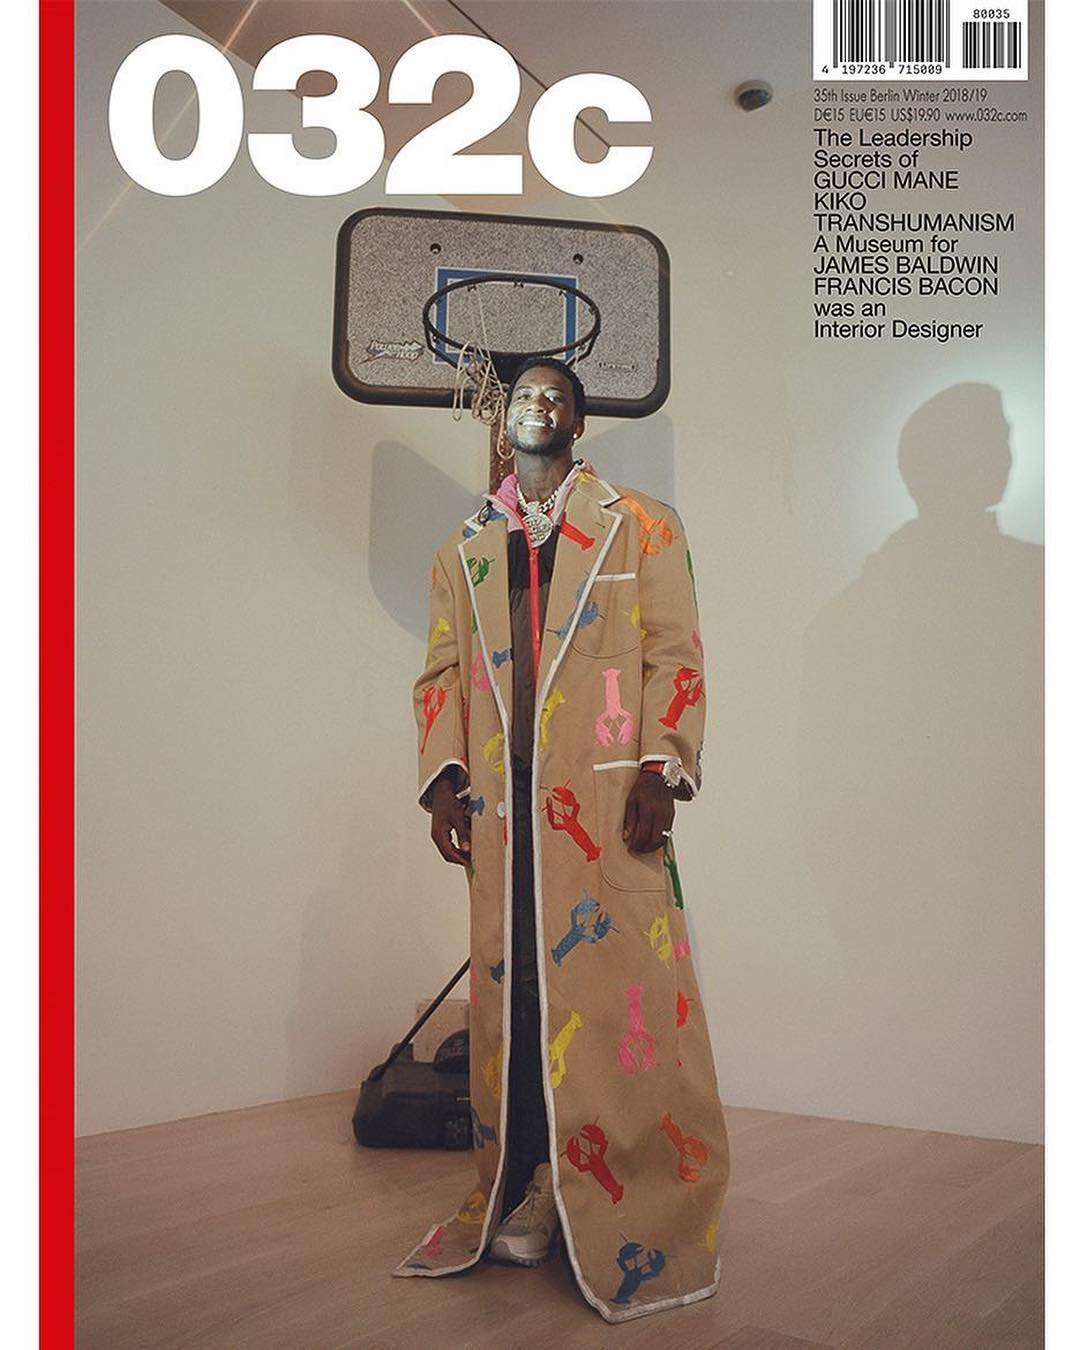 SPOTTED: Gucci Mane covers 032c Magazine in Thom Browne